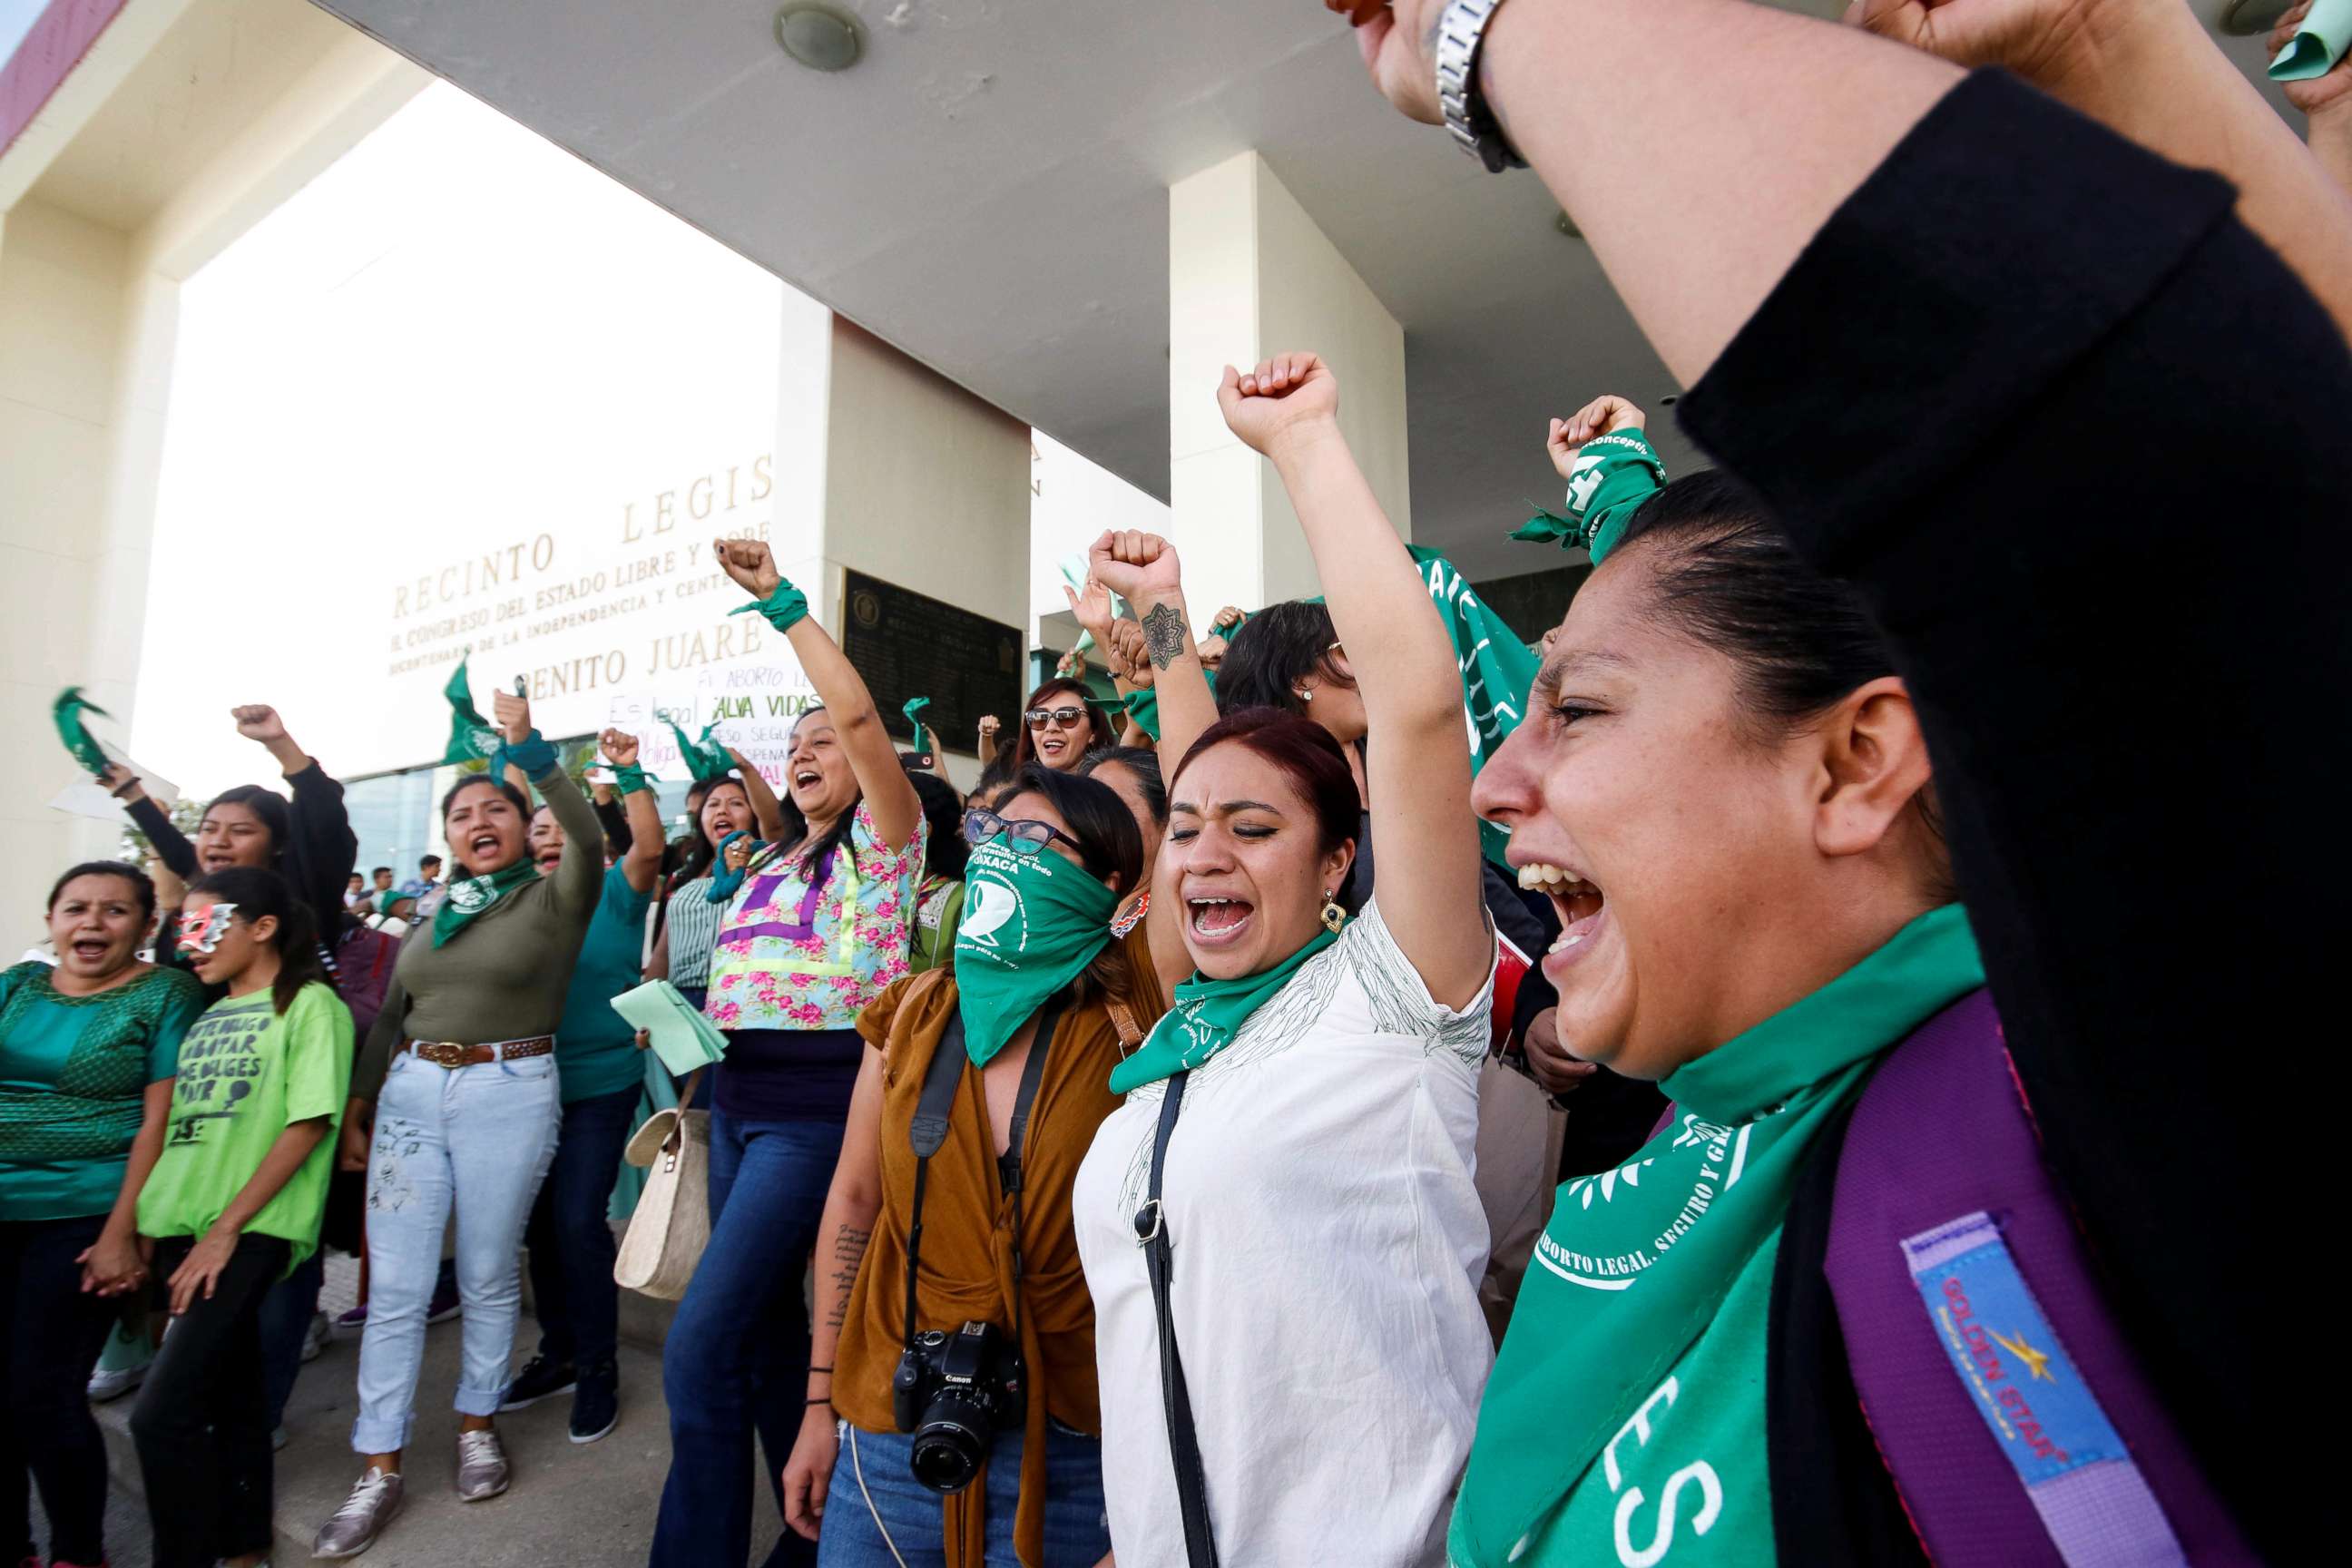 PHOTO: Pro-choice demonstrators celebrate after lawmakers passed a legislation that decriminalizes abortion, outside the local congress in Oaxaca, Mexico Sept. 25, 2019.